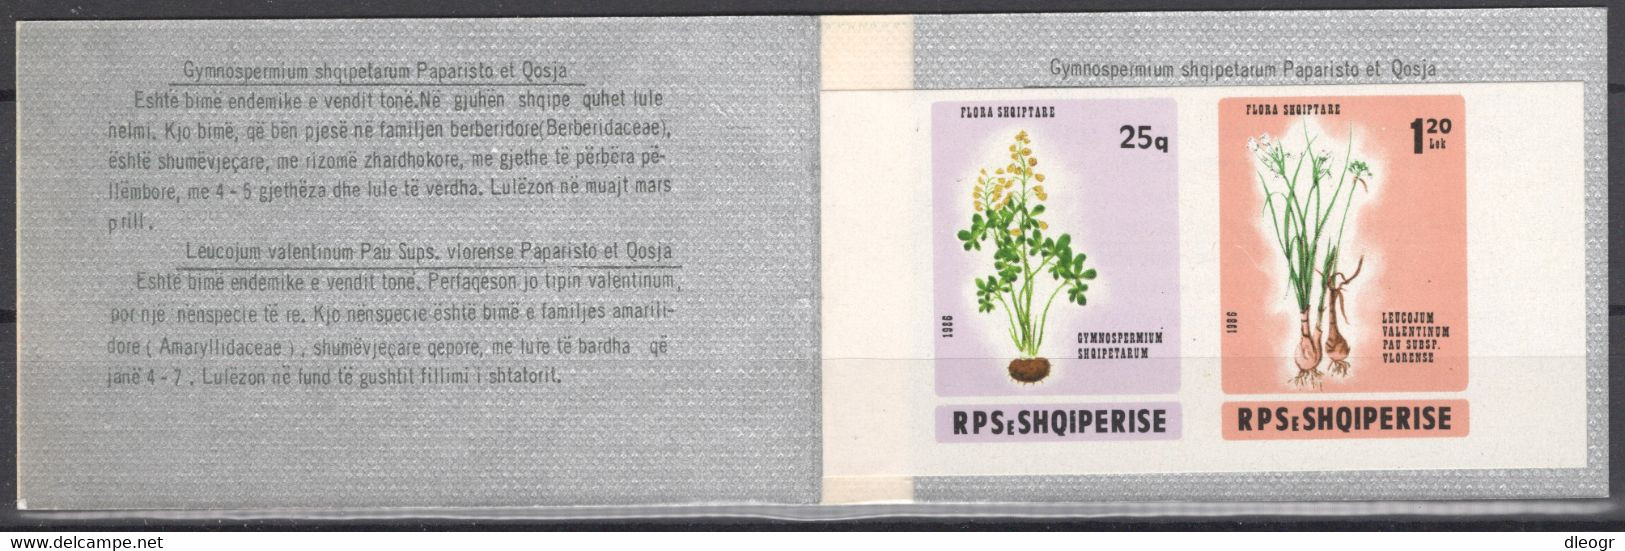 Albania 1986 Flowers Booklet Imperforated MNH VF - Albanie